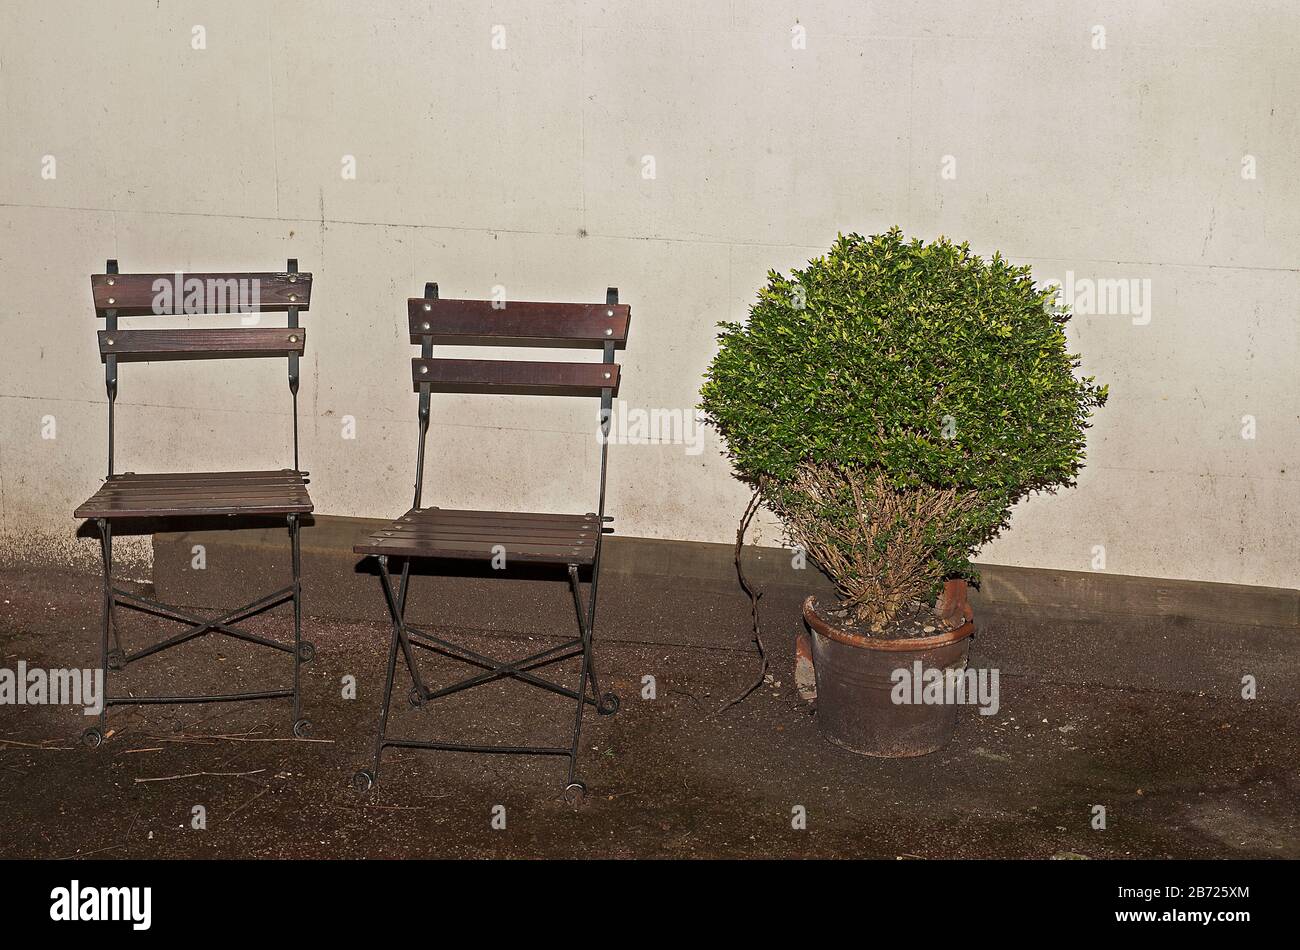 Two Chairs and potted plant Stock Photo